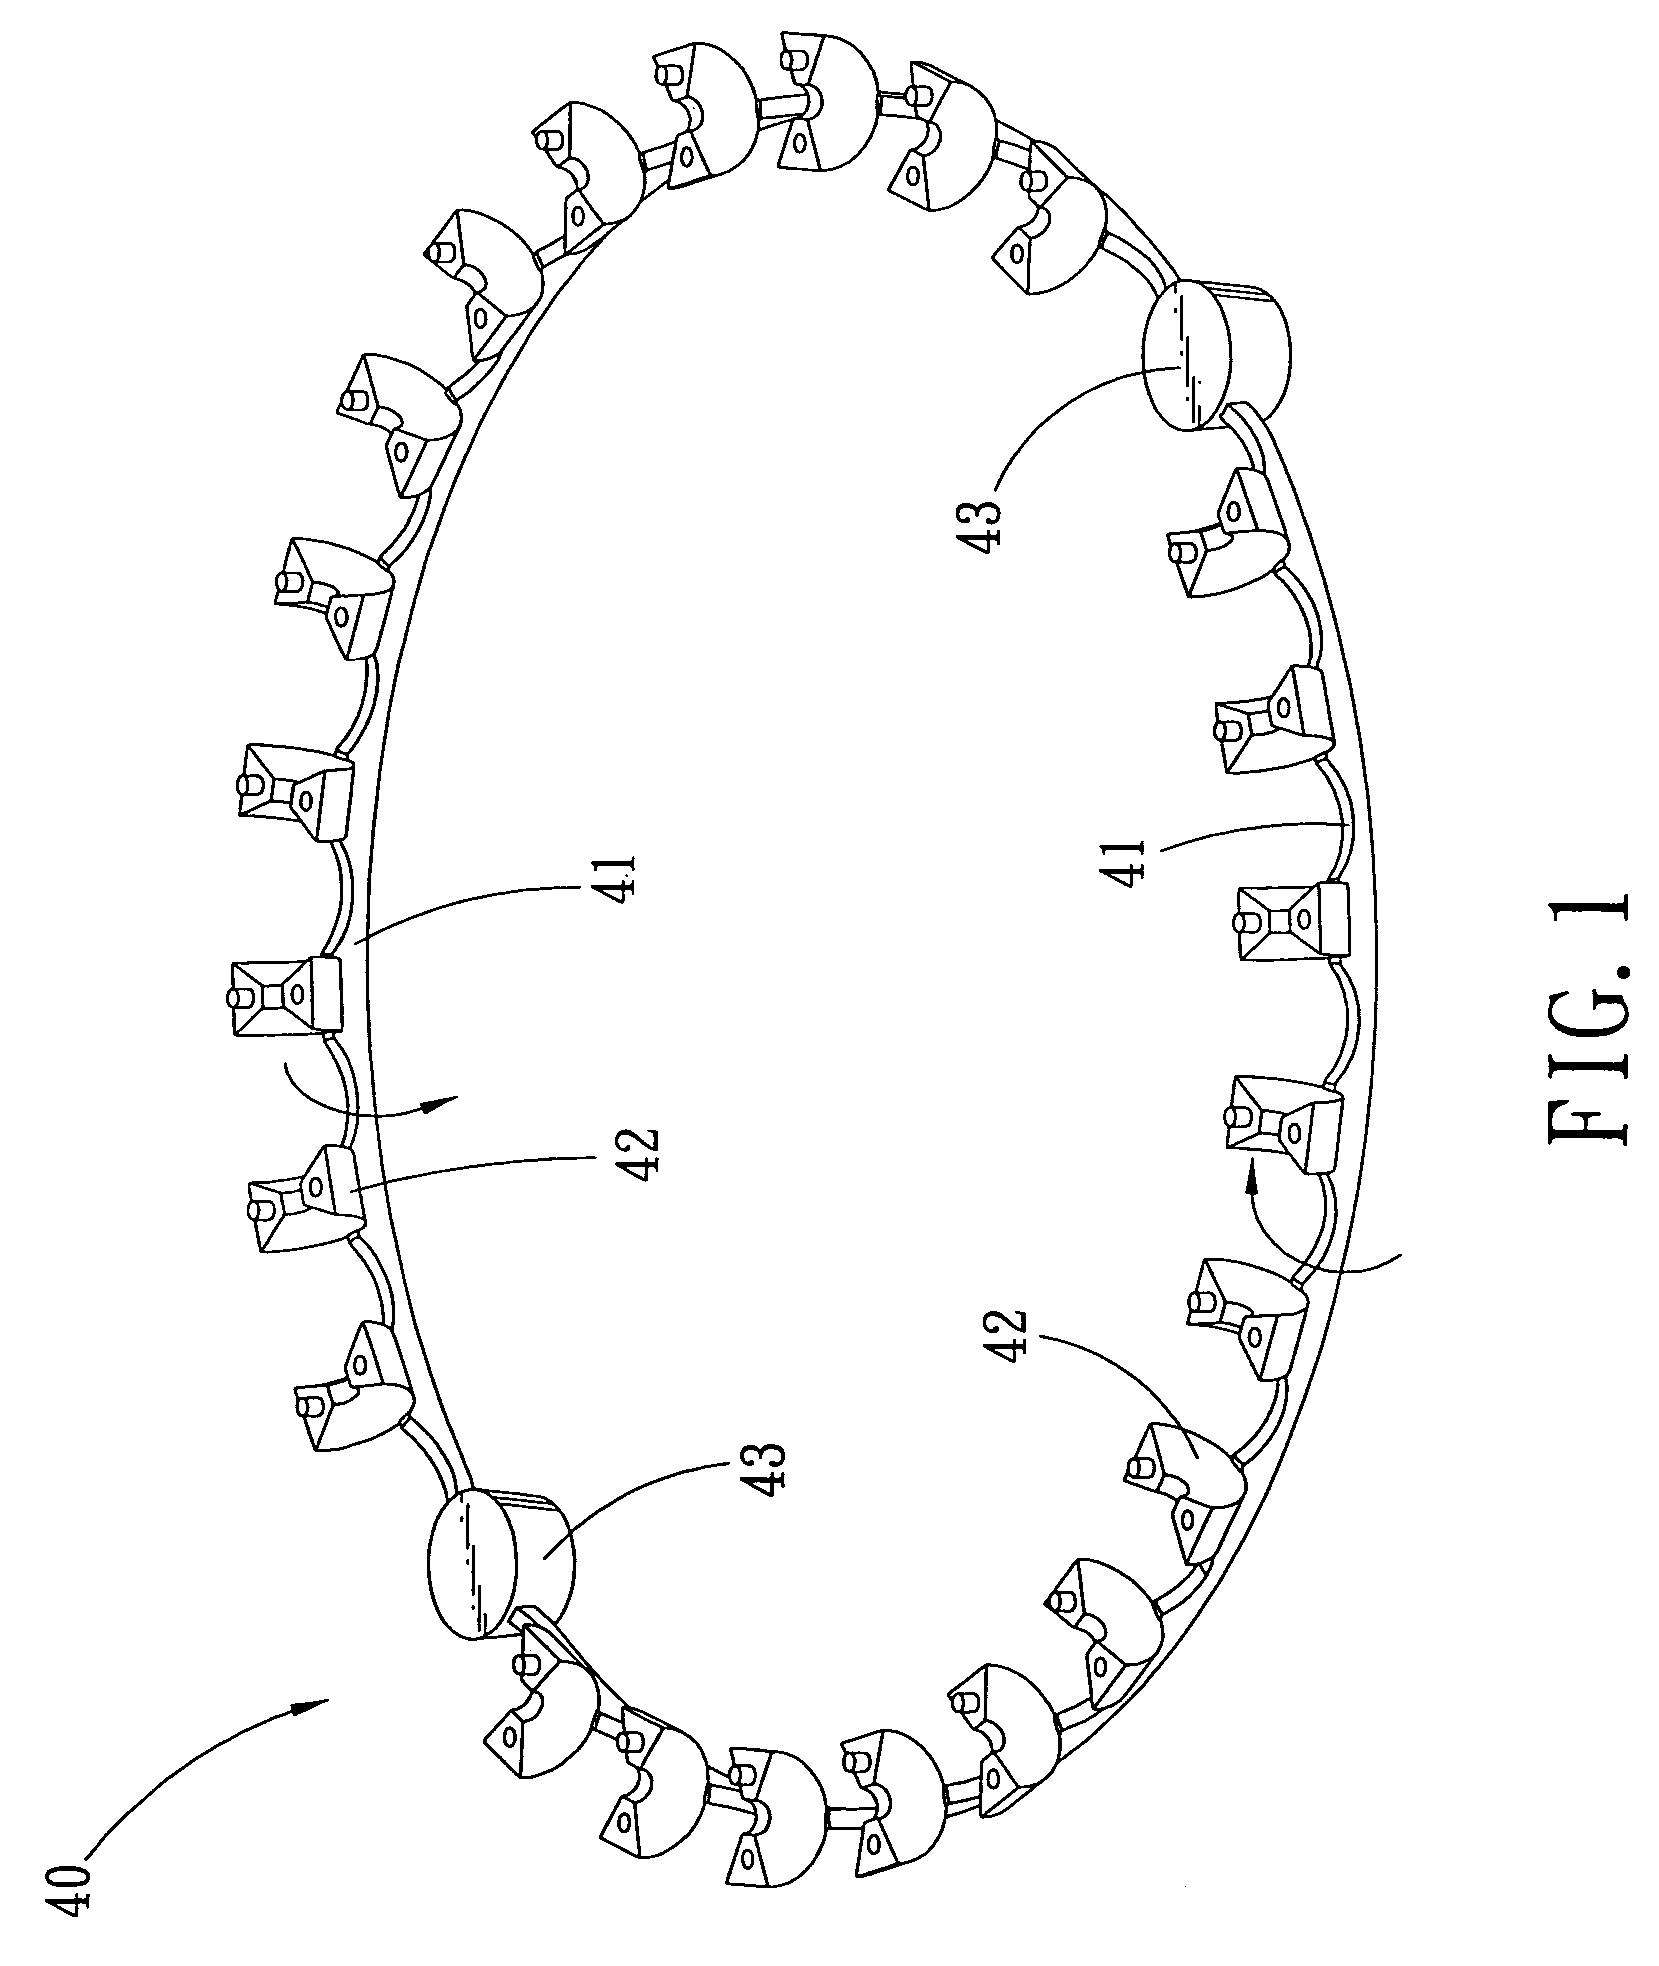 Retaining device for rolling-element